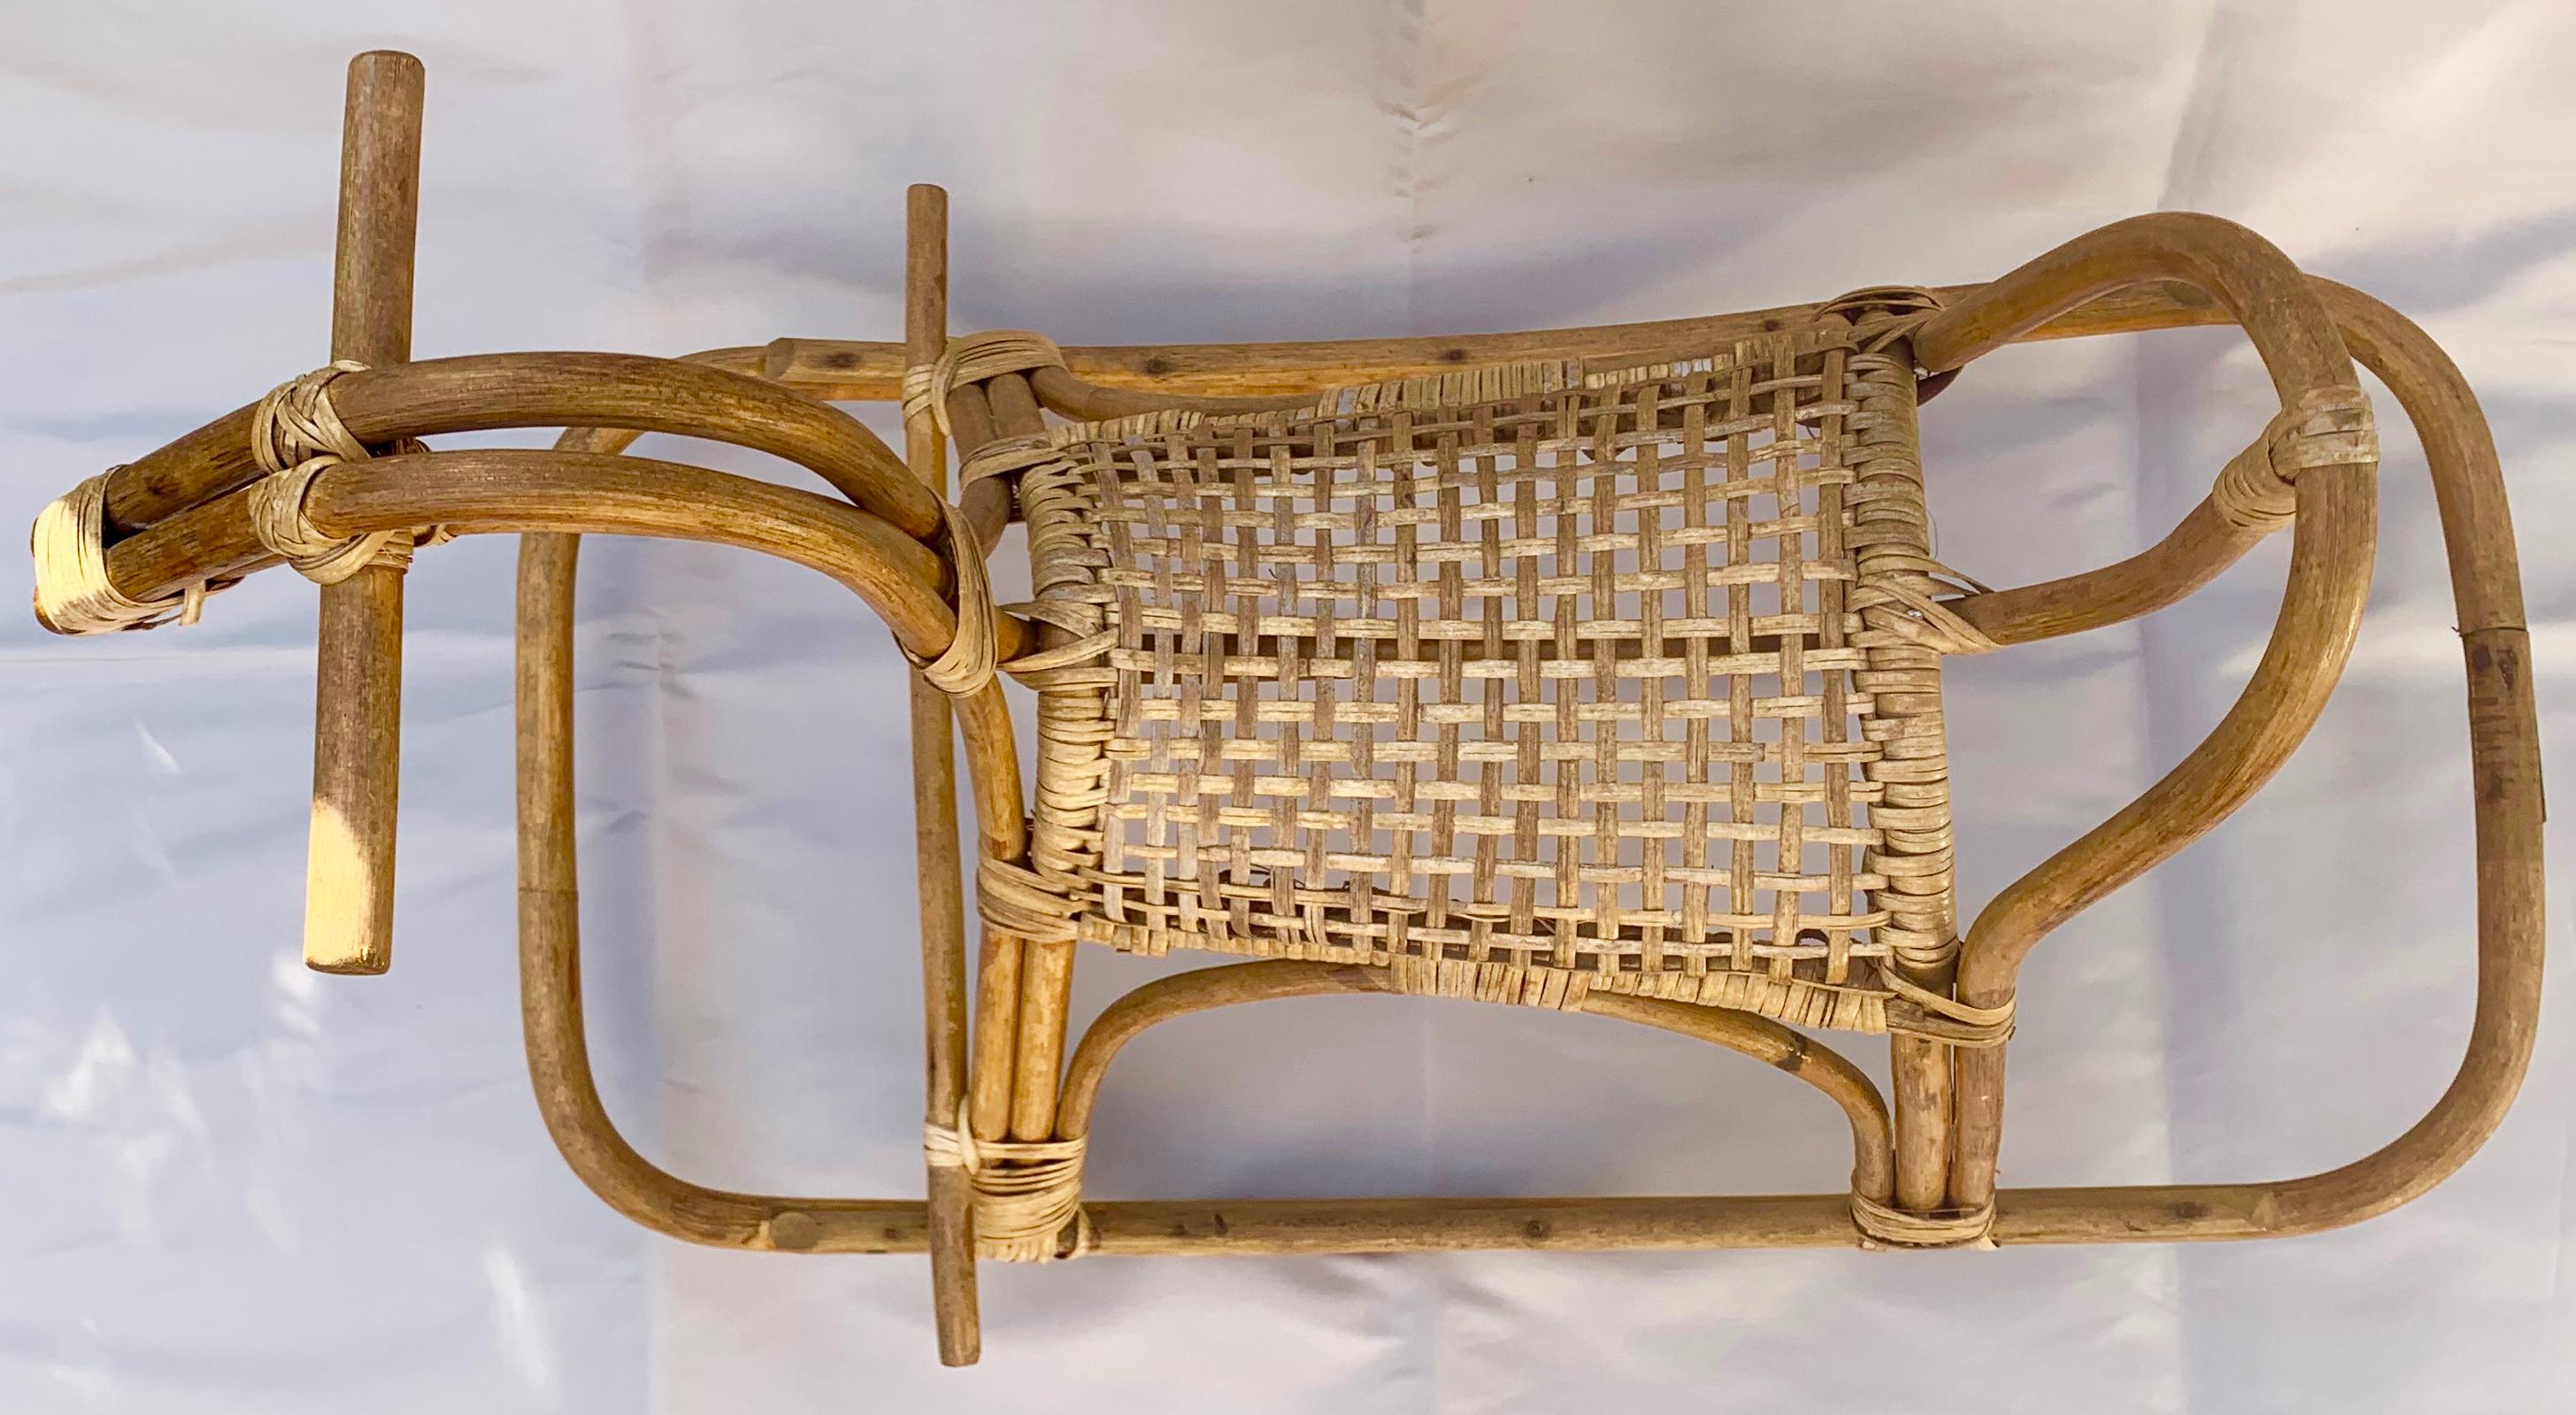 Hand-Woven Franco Albini Midcentury Rocking Horse Sculpture For Sale